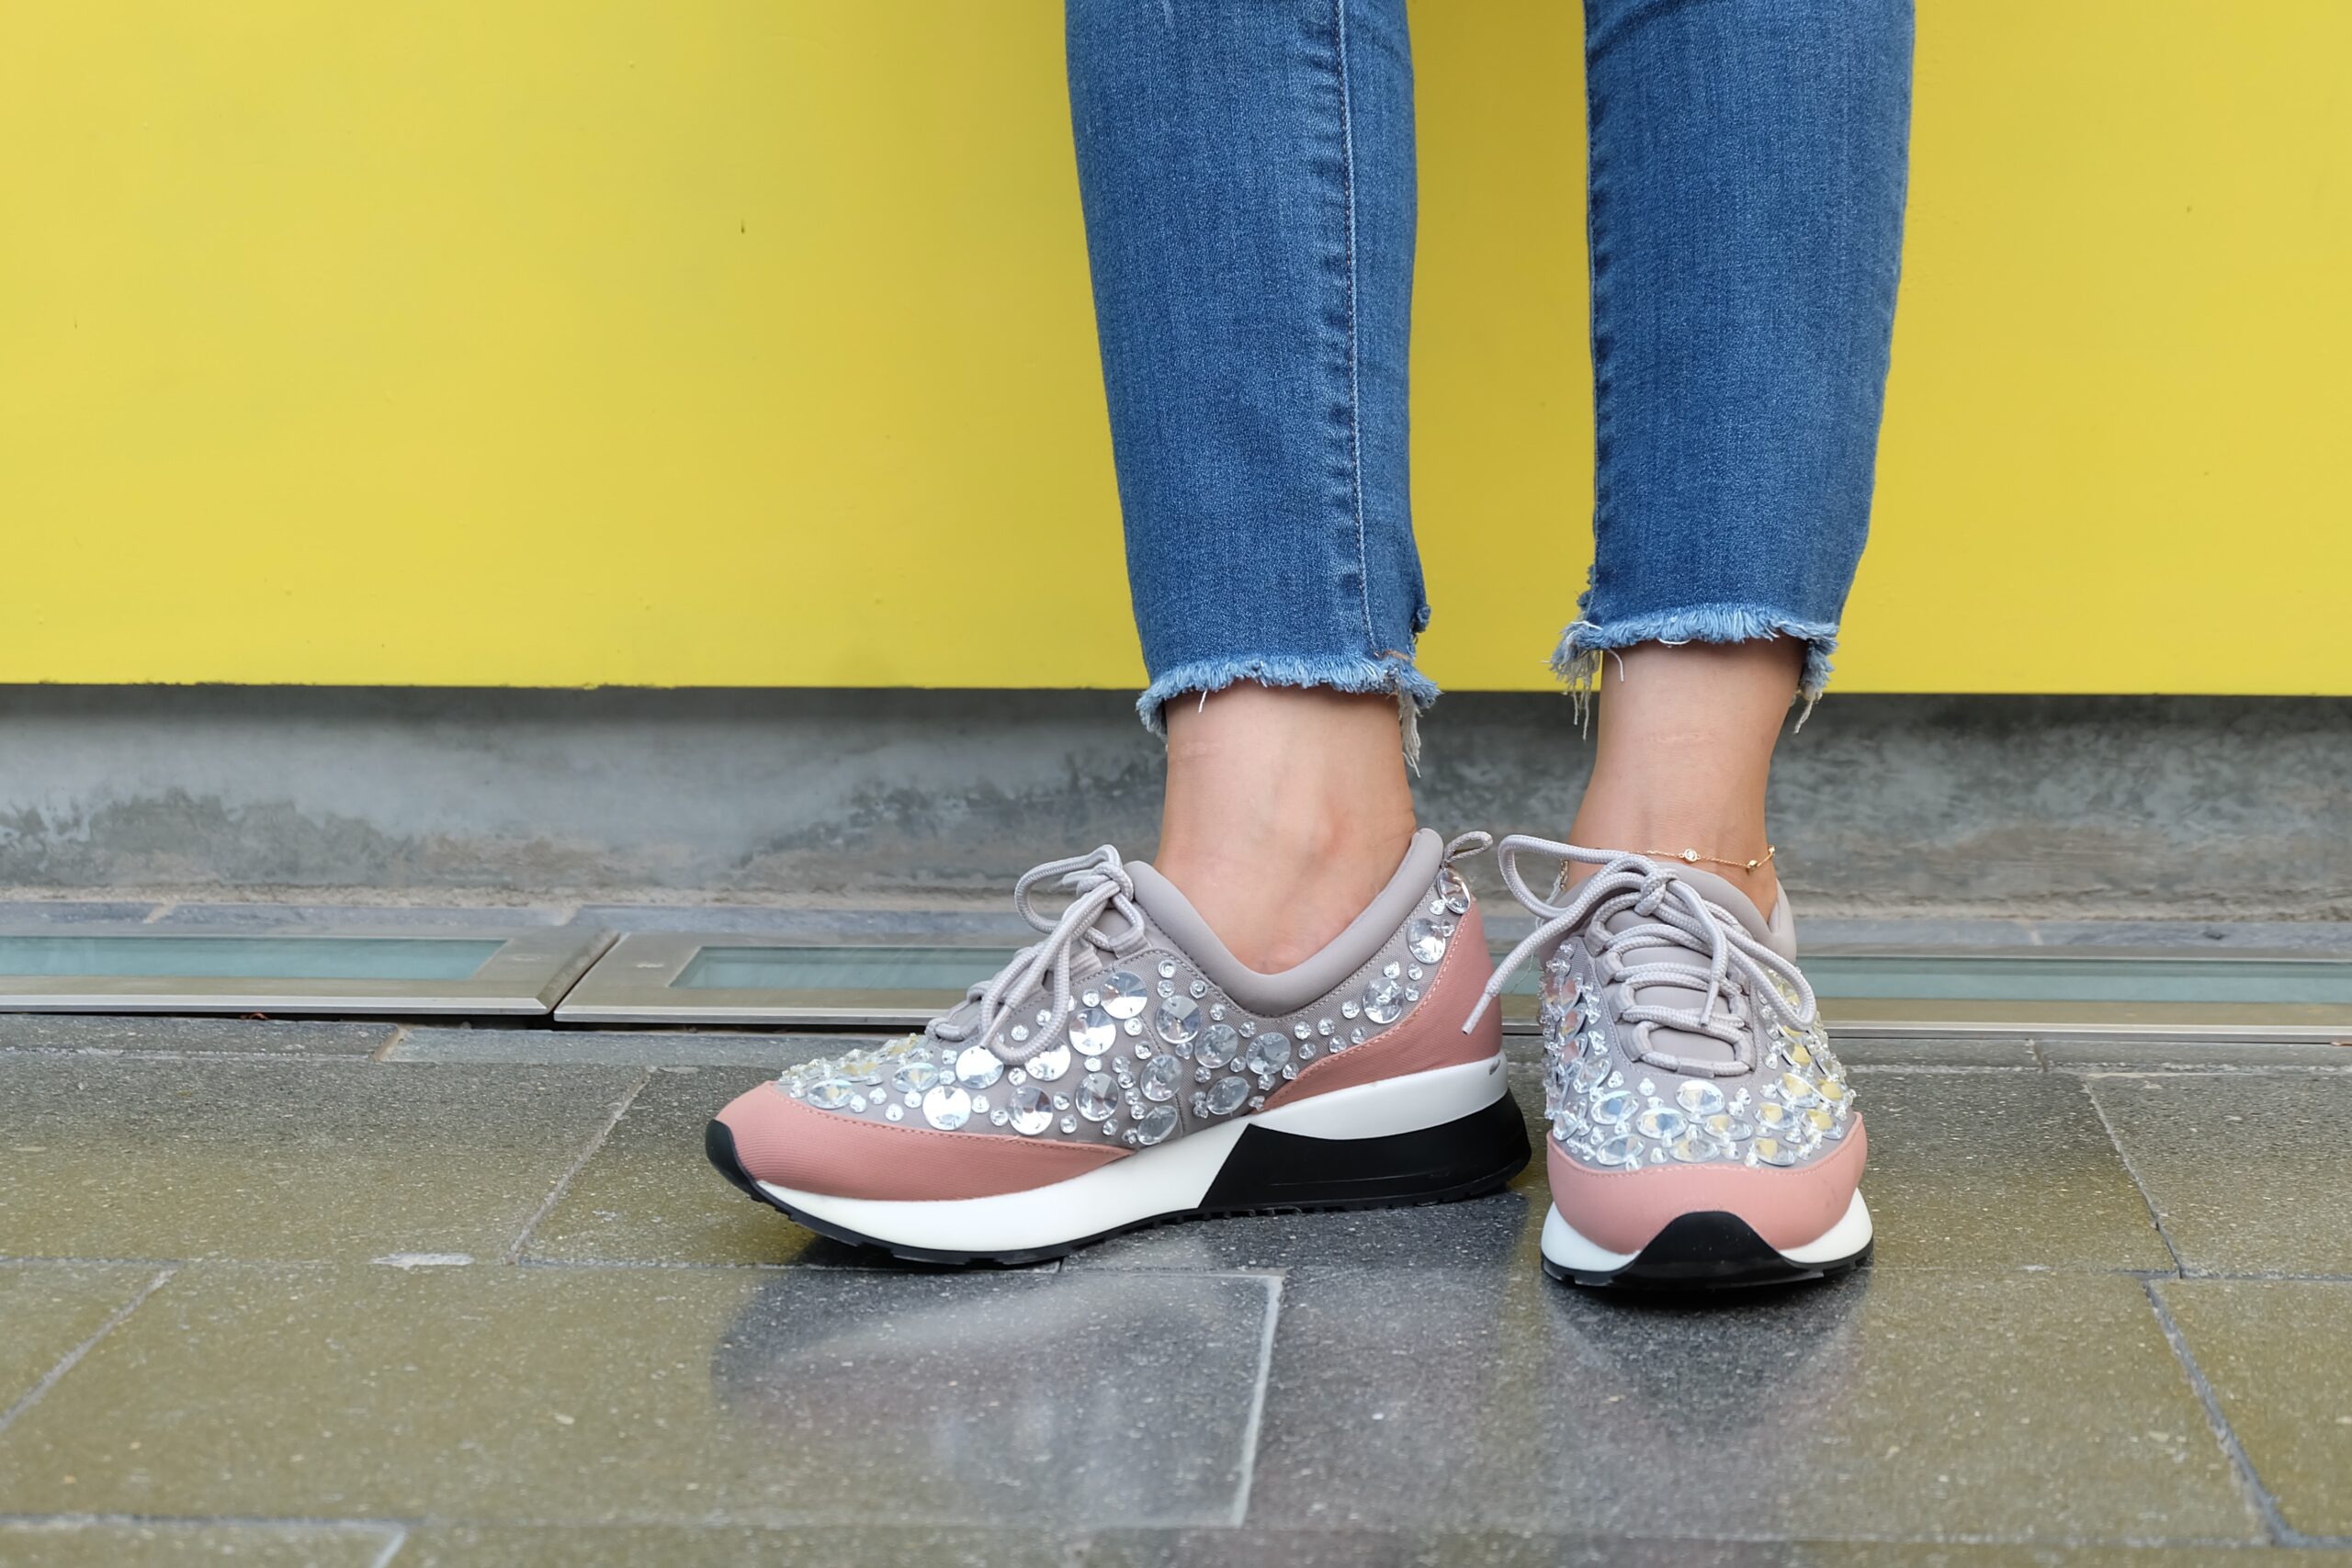 What Are The Factors To Consider Before Buying Women’s Sneakers?